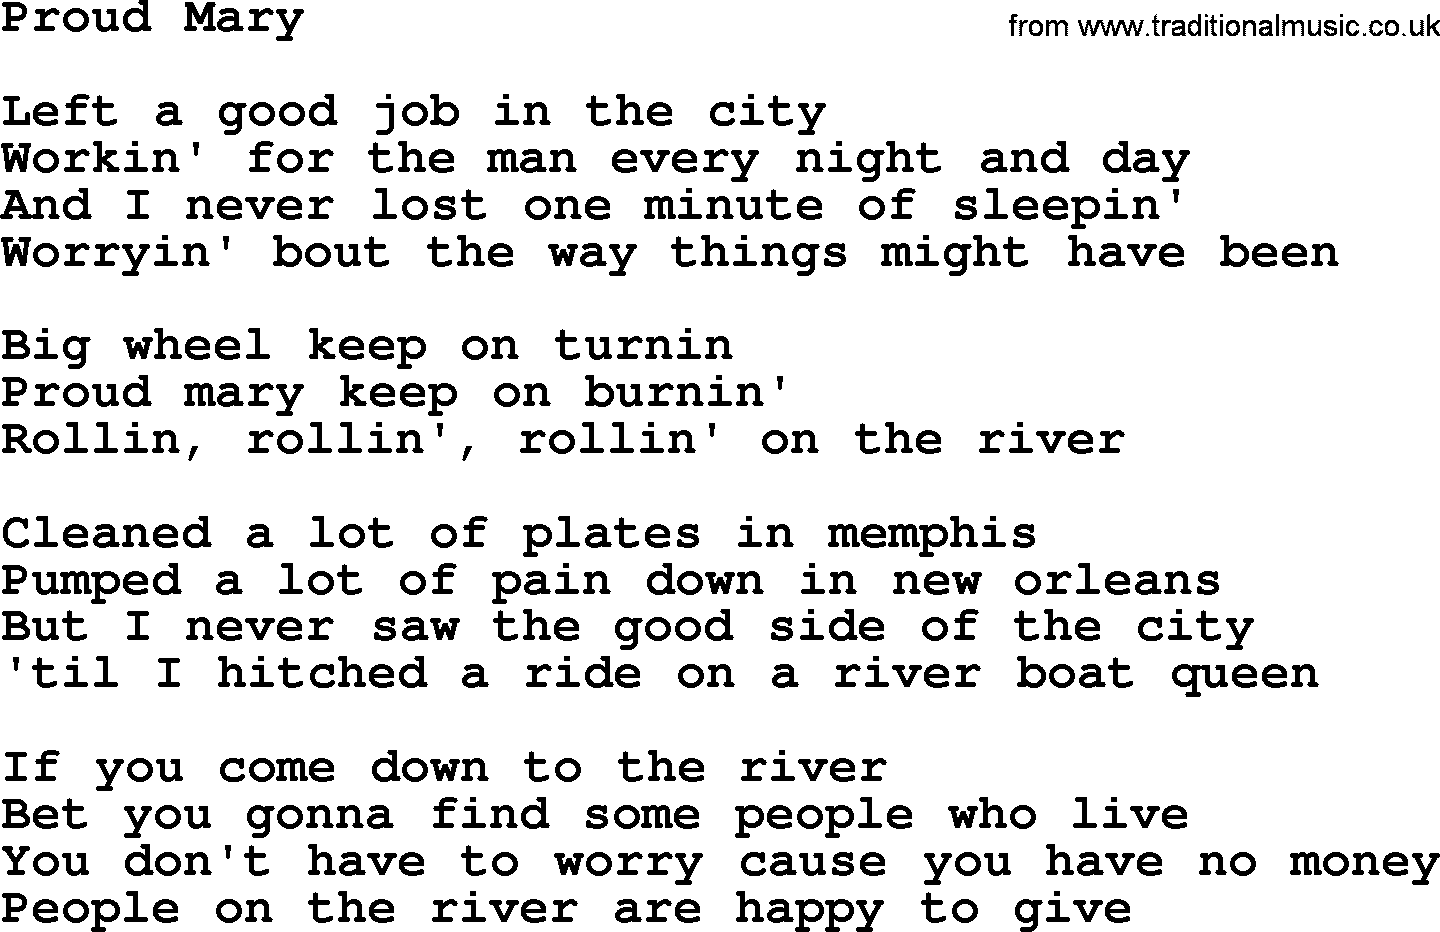 proud mary riverboat queen lyrics